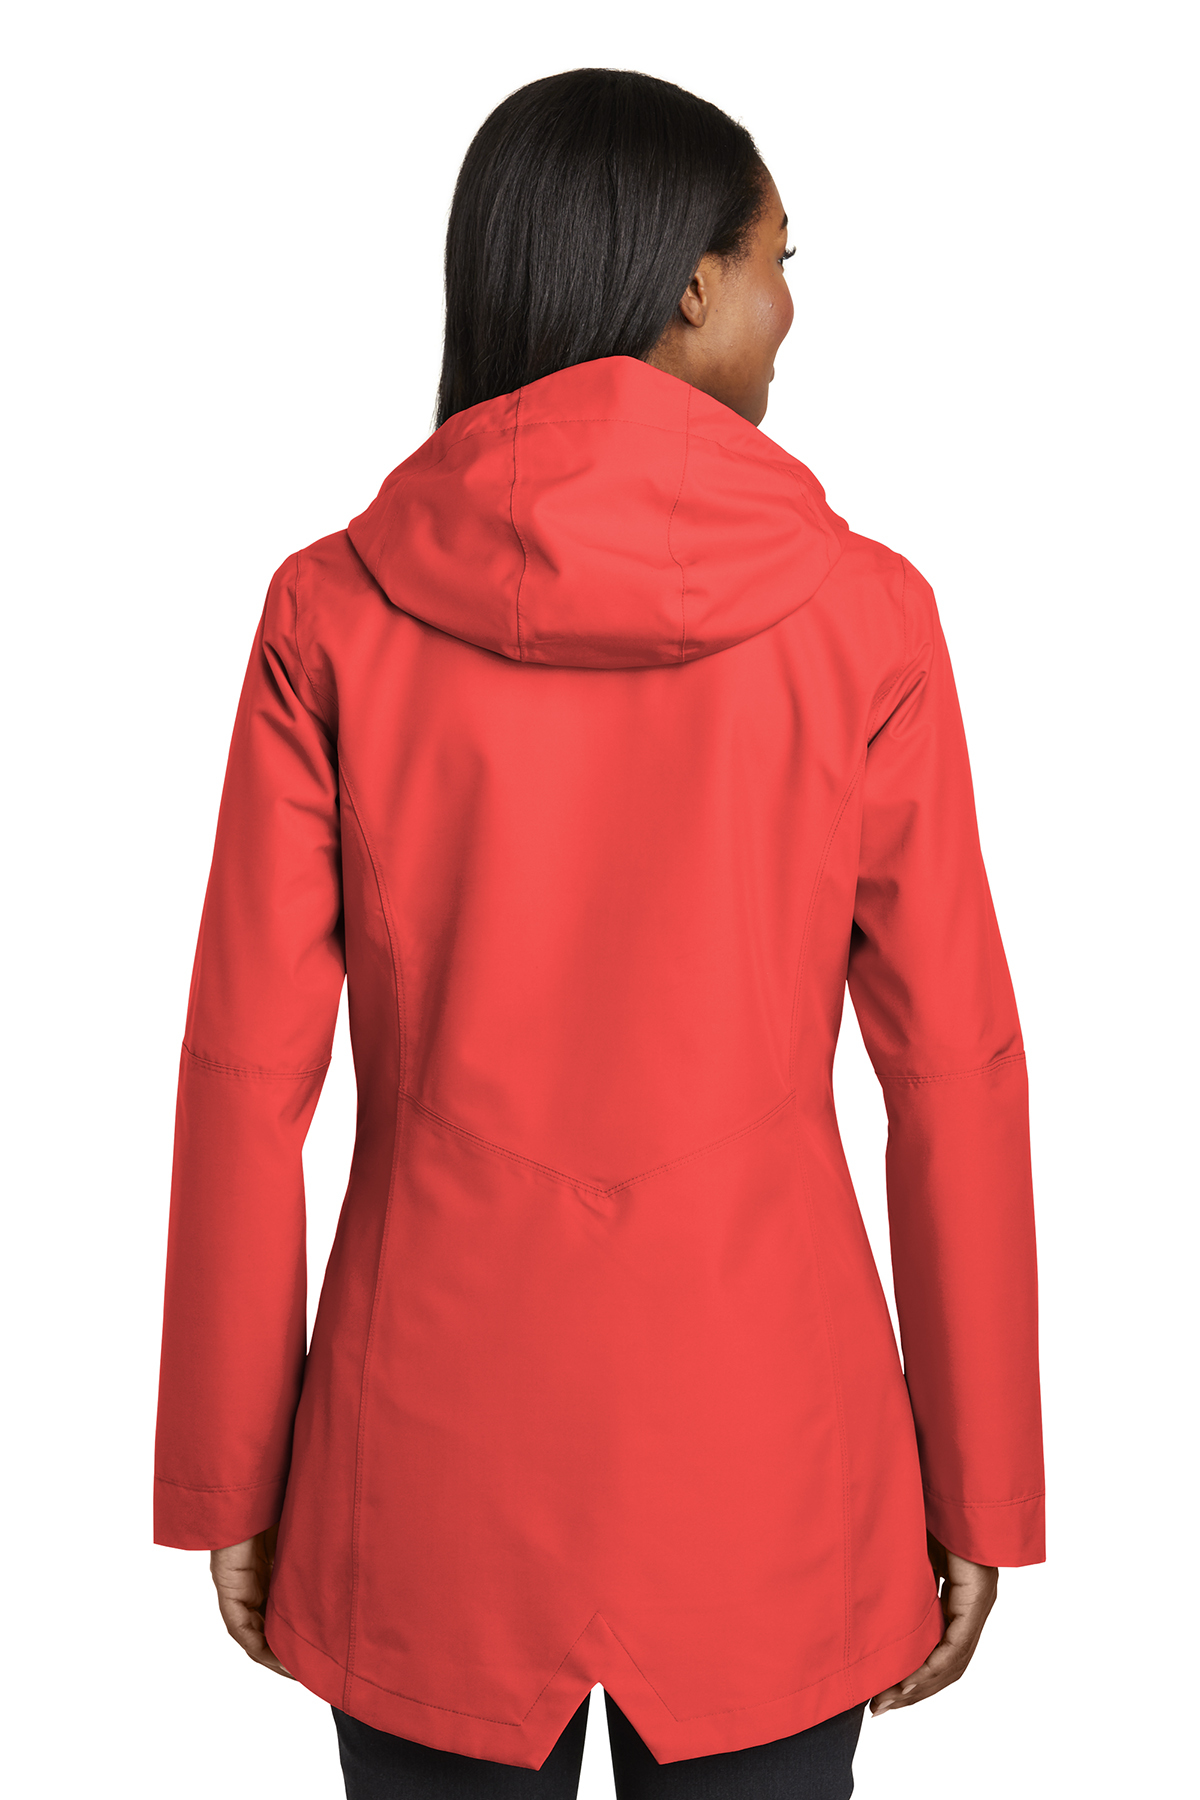 Port Authority Ladies Collective Outer Shell Jacket | Product | SanMar